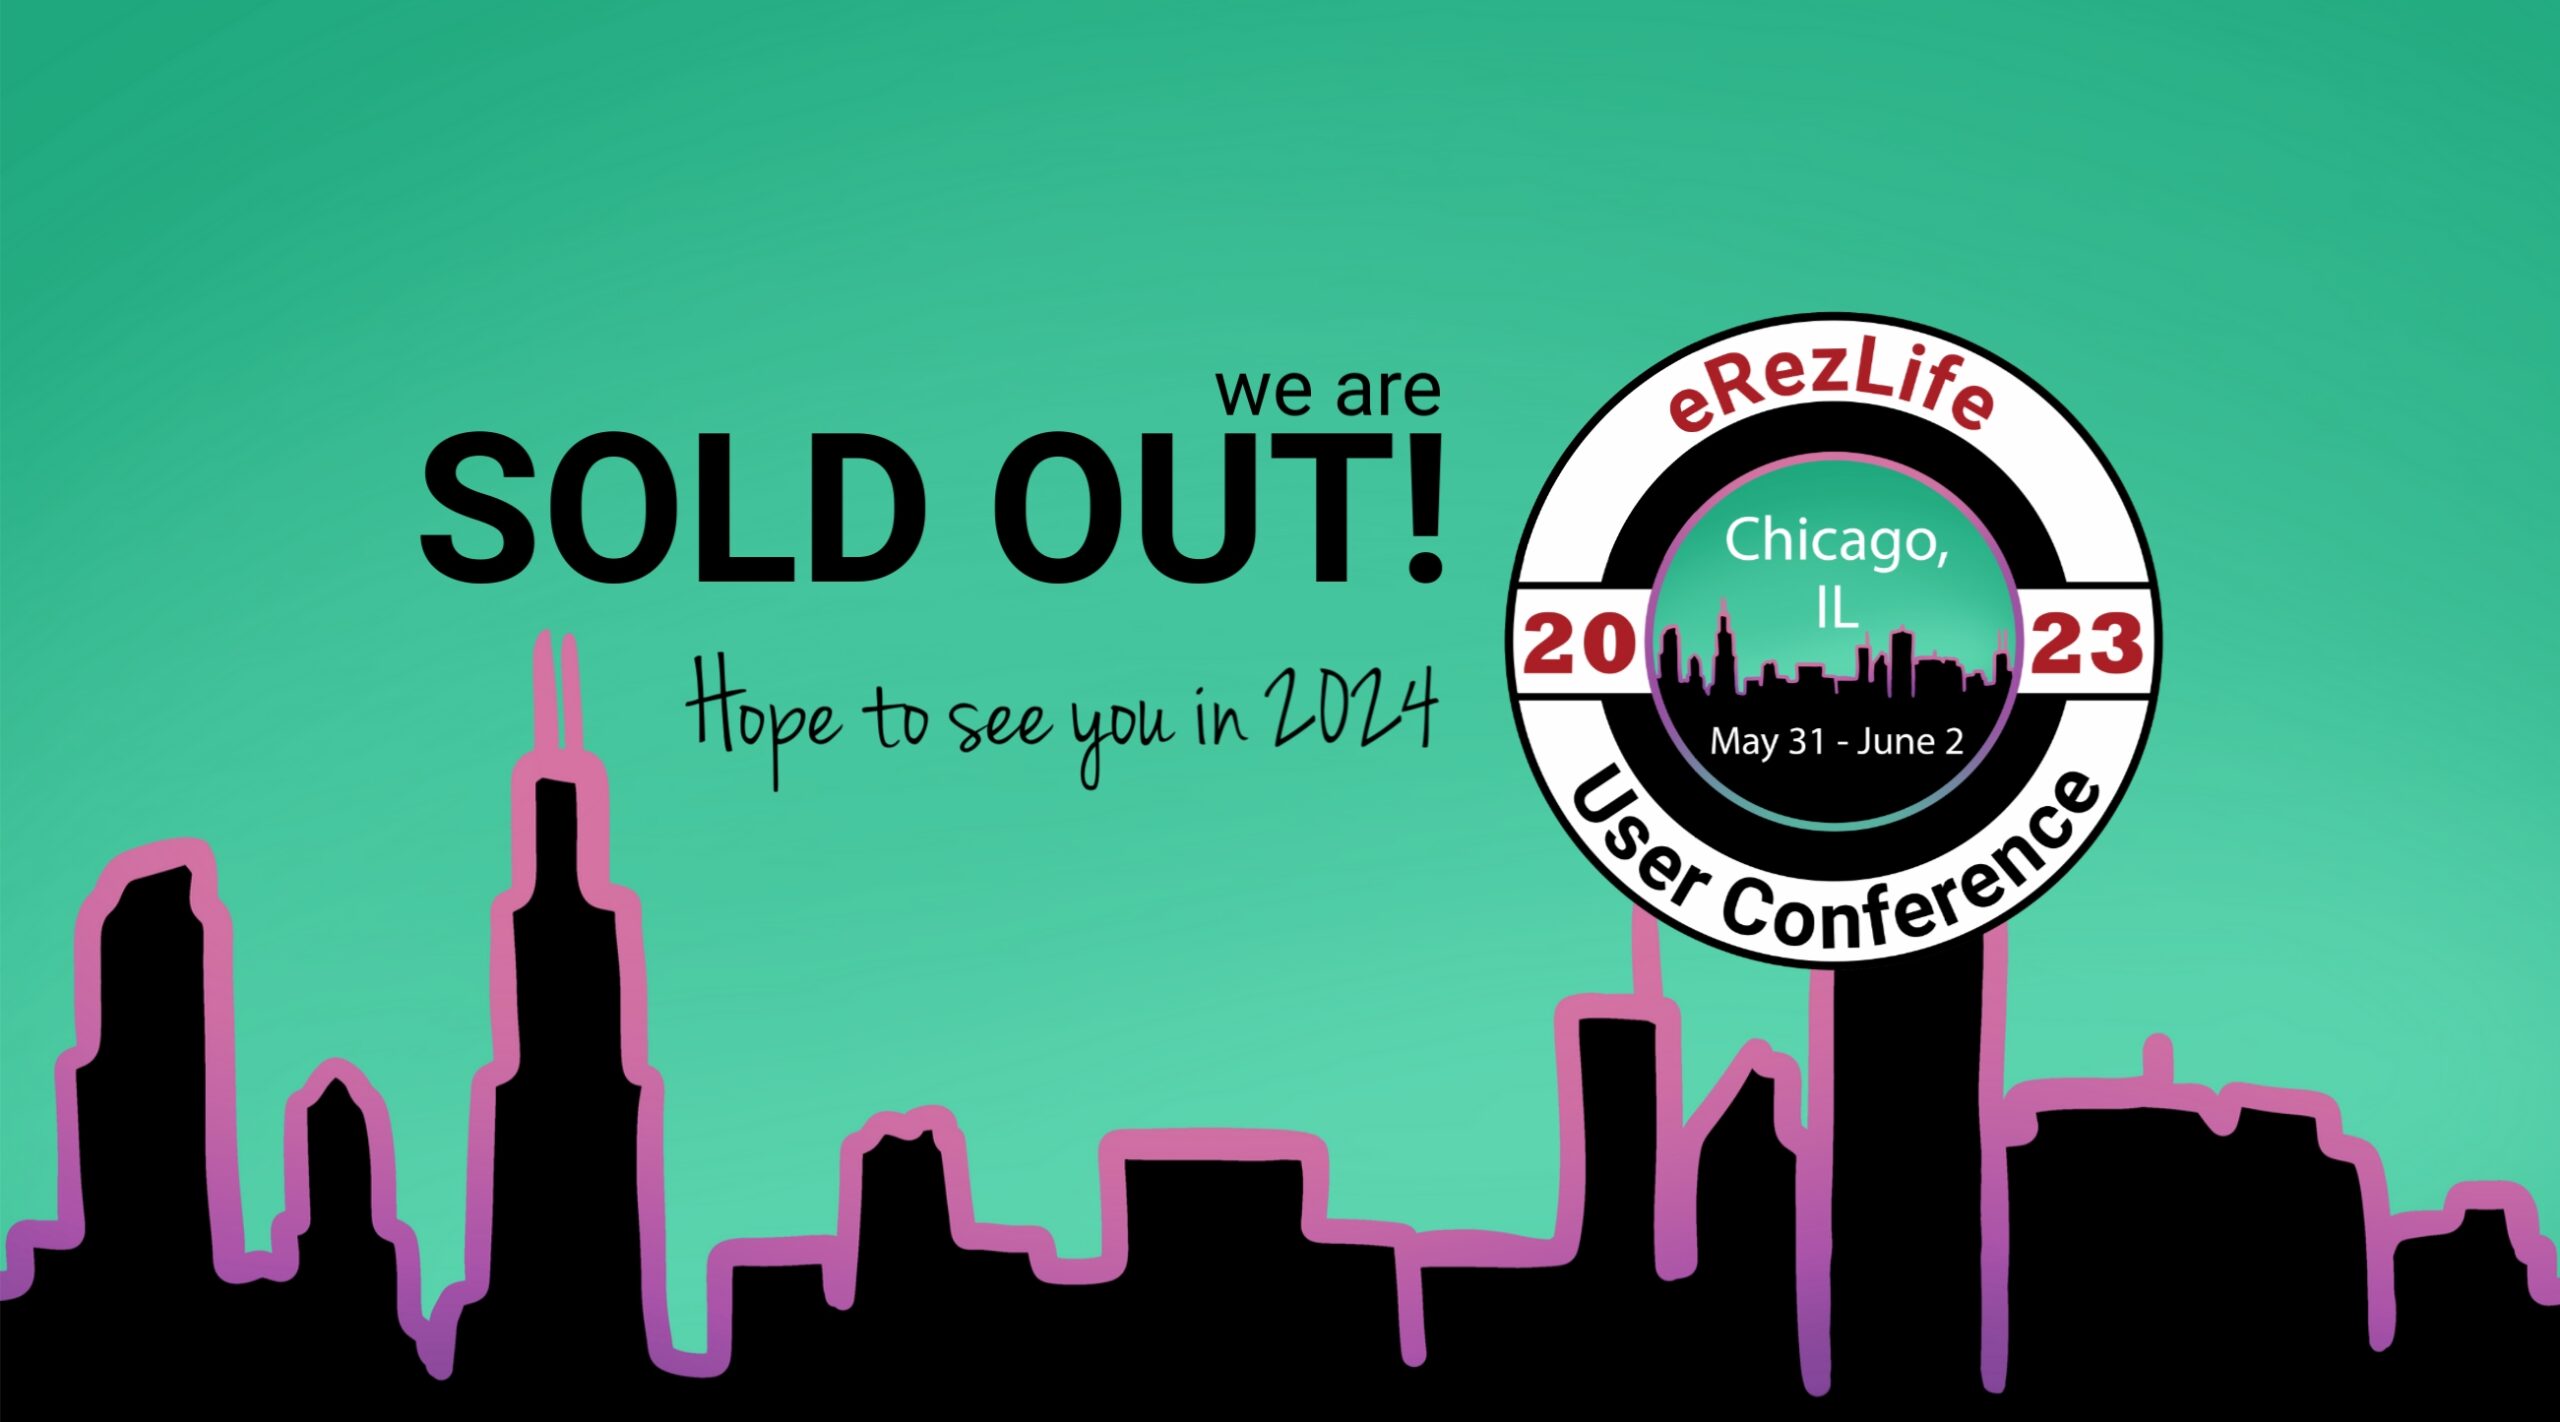 2023 User Conference Sold Out! eRezLife Software